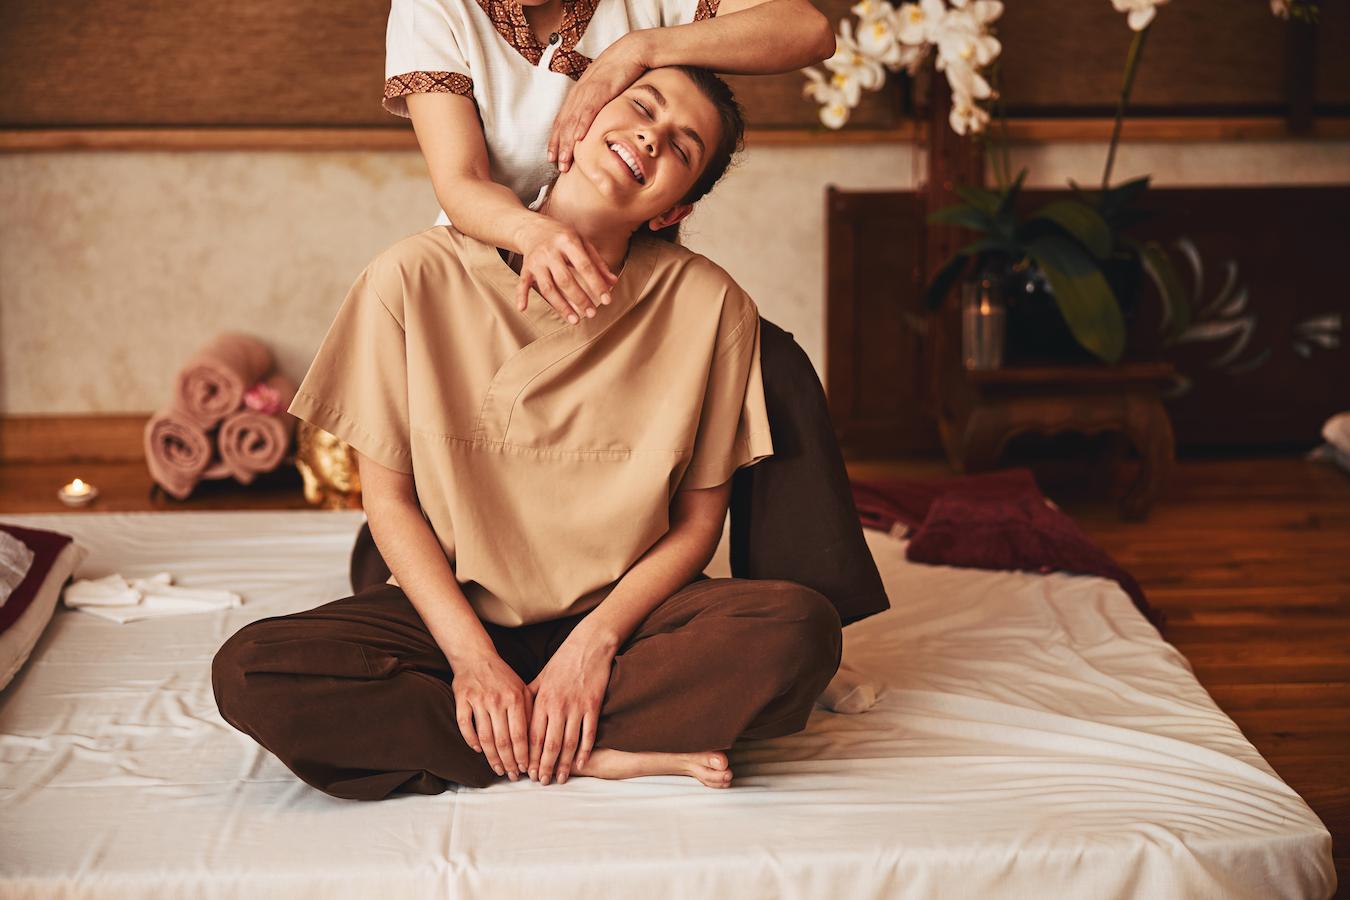 a woman getting a thai massage apply pressure oxygen supply thailand massages lowers stress father doctor